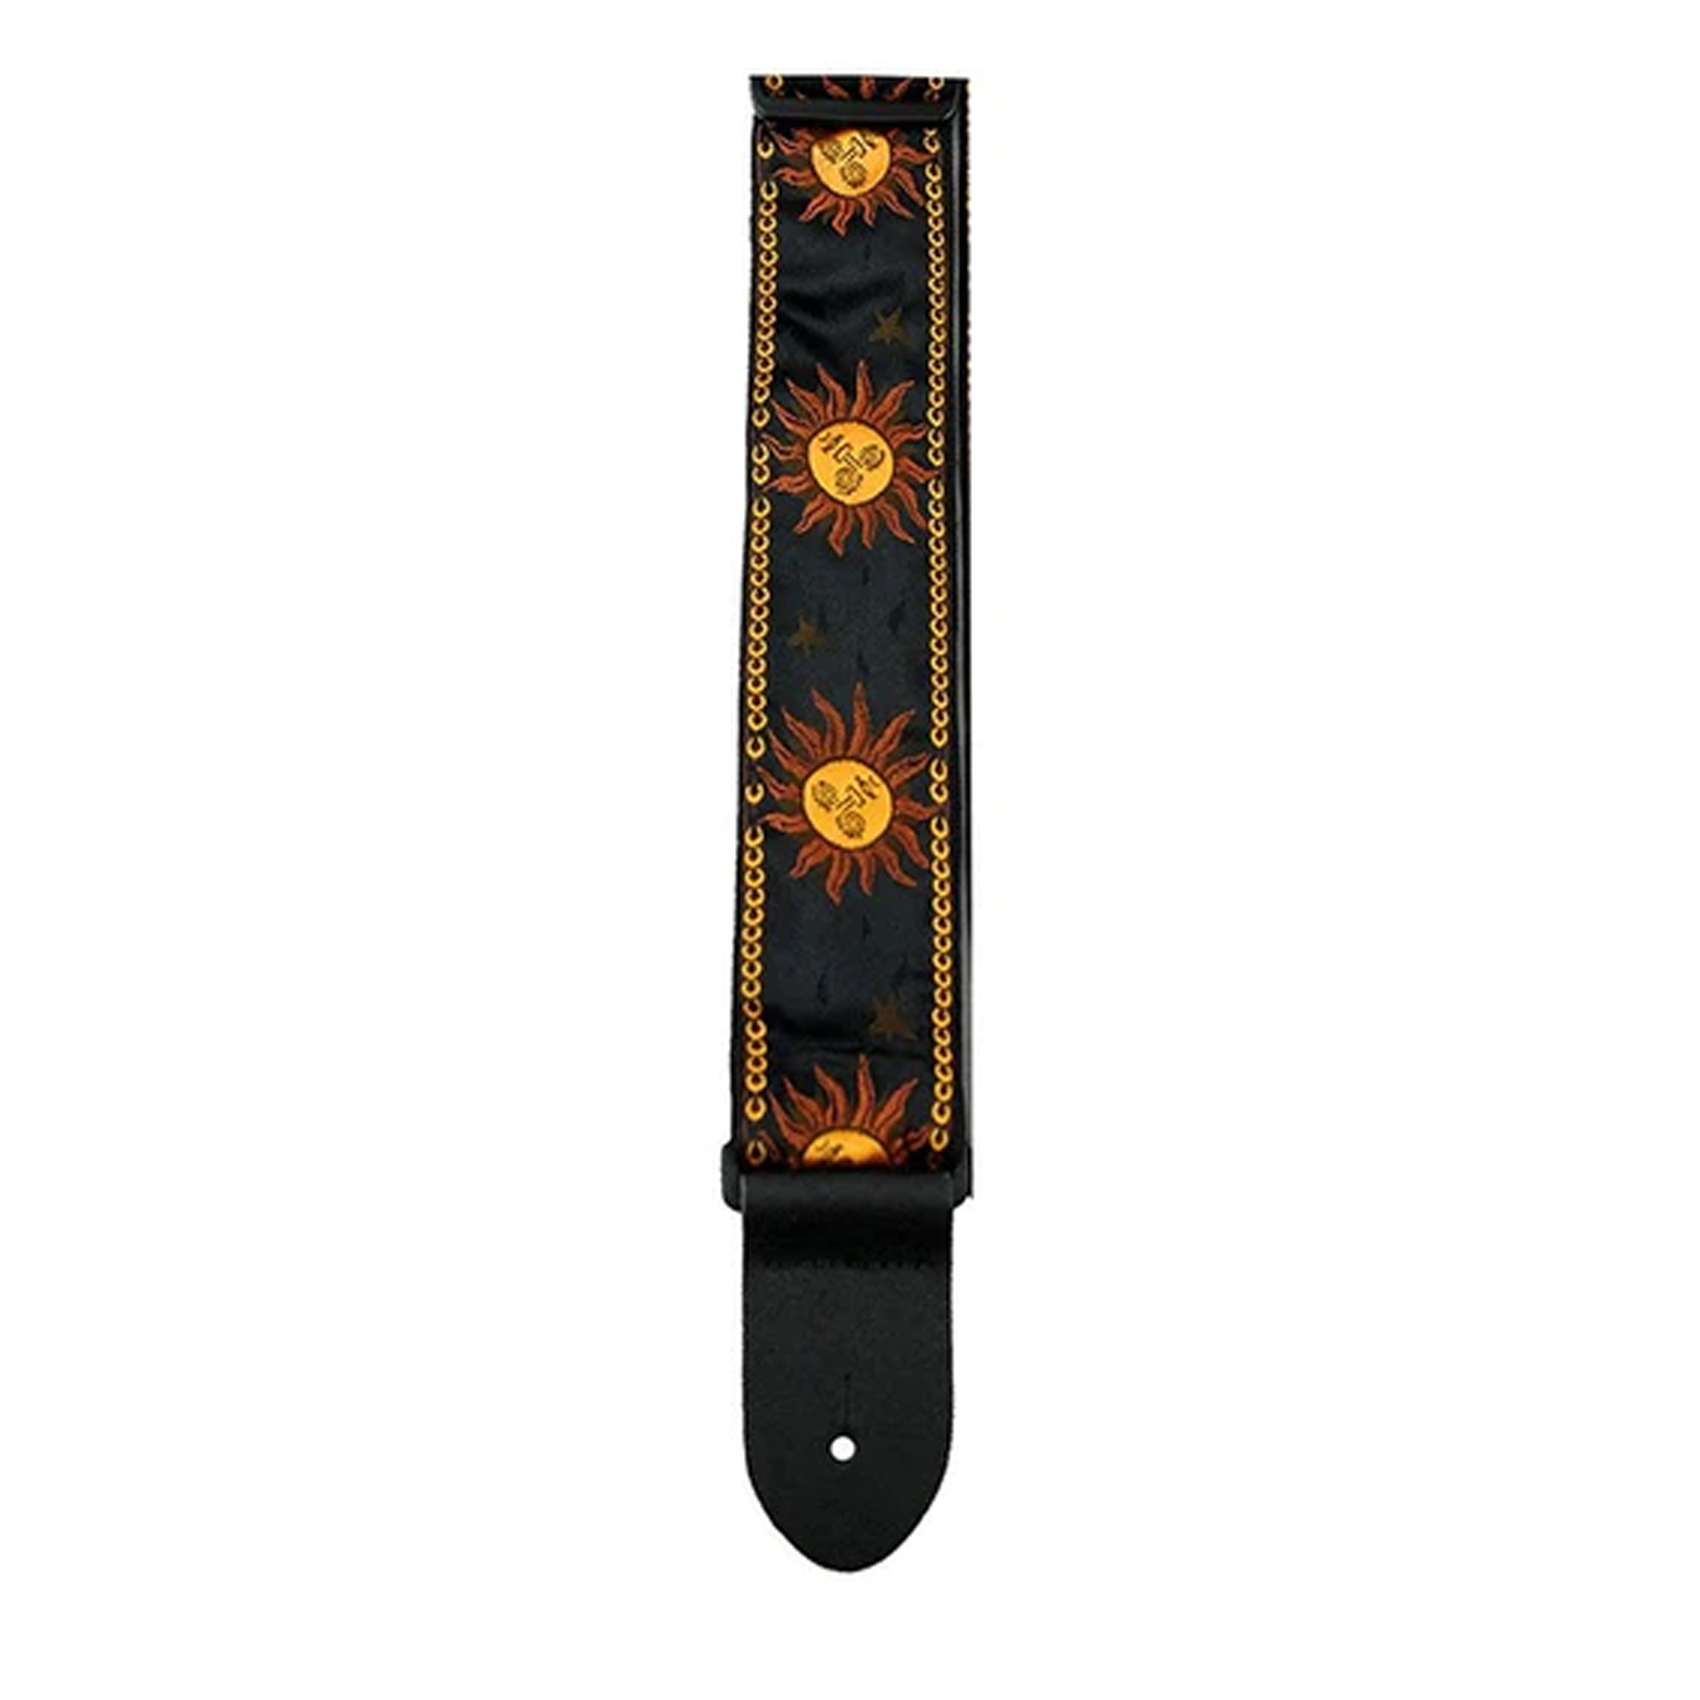 Son of drum - PERRIS 2" JACQUARD GUITAR STRAP WITH YELLOW SUNS ON BLACK BACKING DESIGN